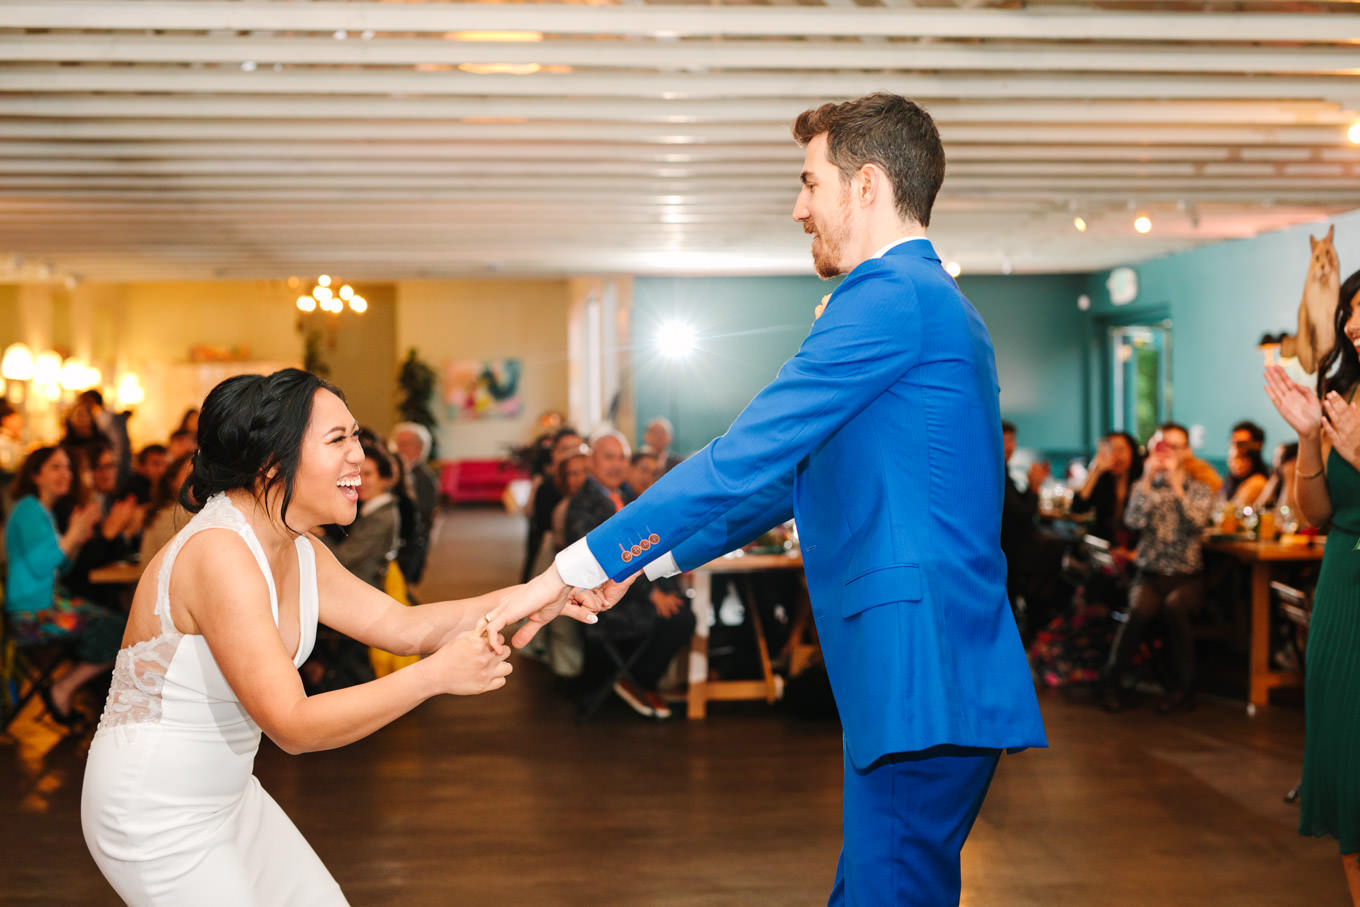 Bride and groom first dance at reception | TV inspired wedding at The Fig House Los Angeles | Published on The Knot | Fresh and colorful photography for fun-loving couples in Southern California | #losangeleswedding #TVwedding #colorfulwedding #theknot   Source: Mary Costa Photography | Los Angeles wedding photographer